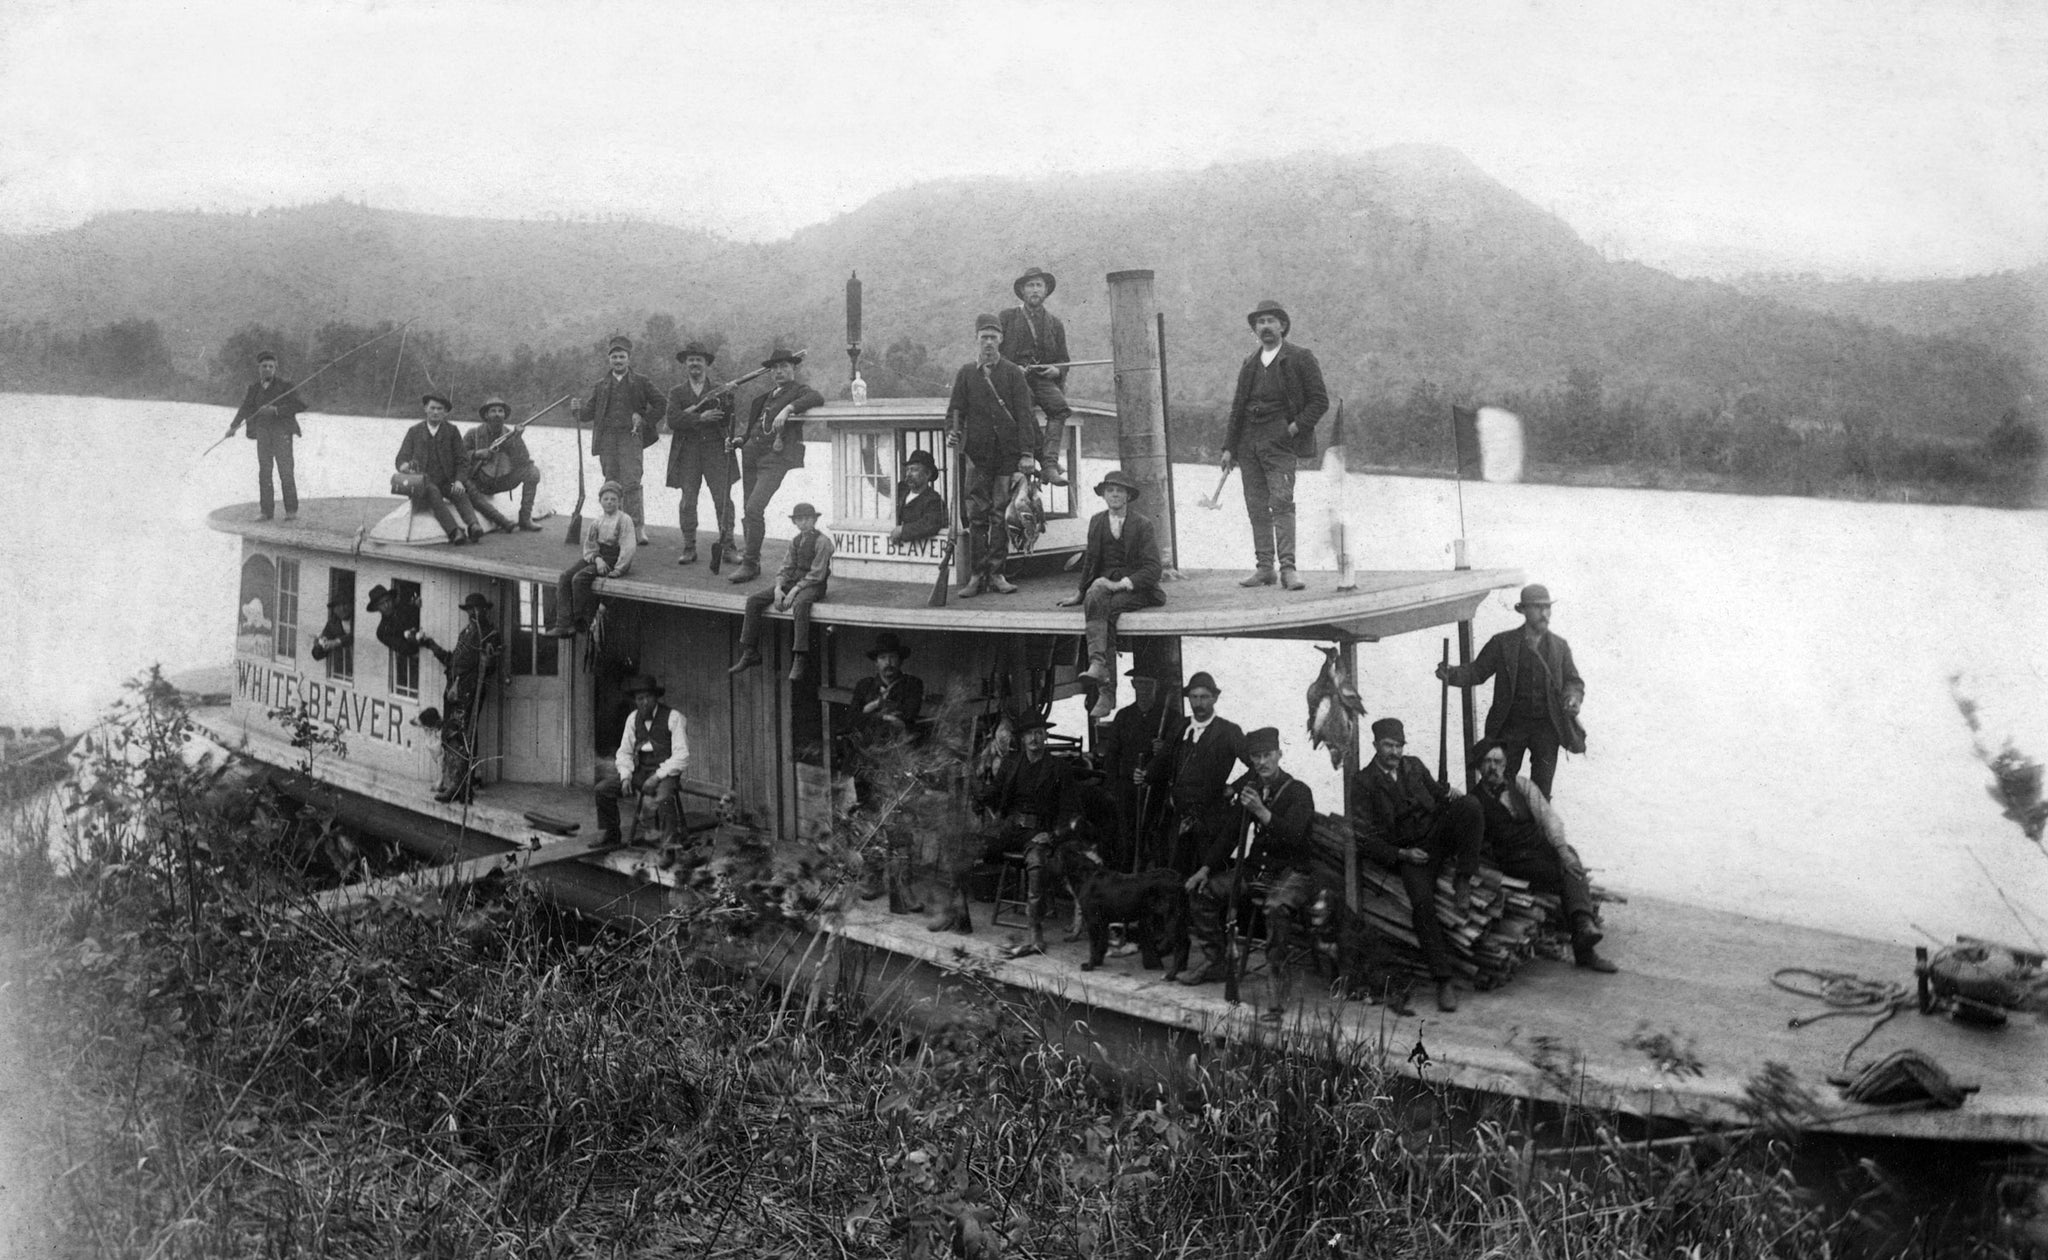 A hunting party on the steamboat White Beaver, circa 1900. The boat belonged to G. L. Winslow, who can be seen sitting on the wood pile. His son, E. M. Winslow, is on the left. -- COURTESY UNIVERSITY OF WISCONSIN-LA CROSSE / #17260